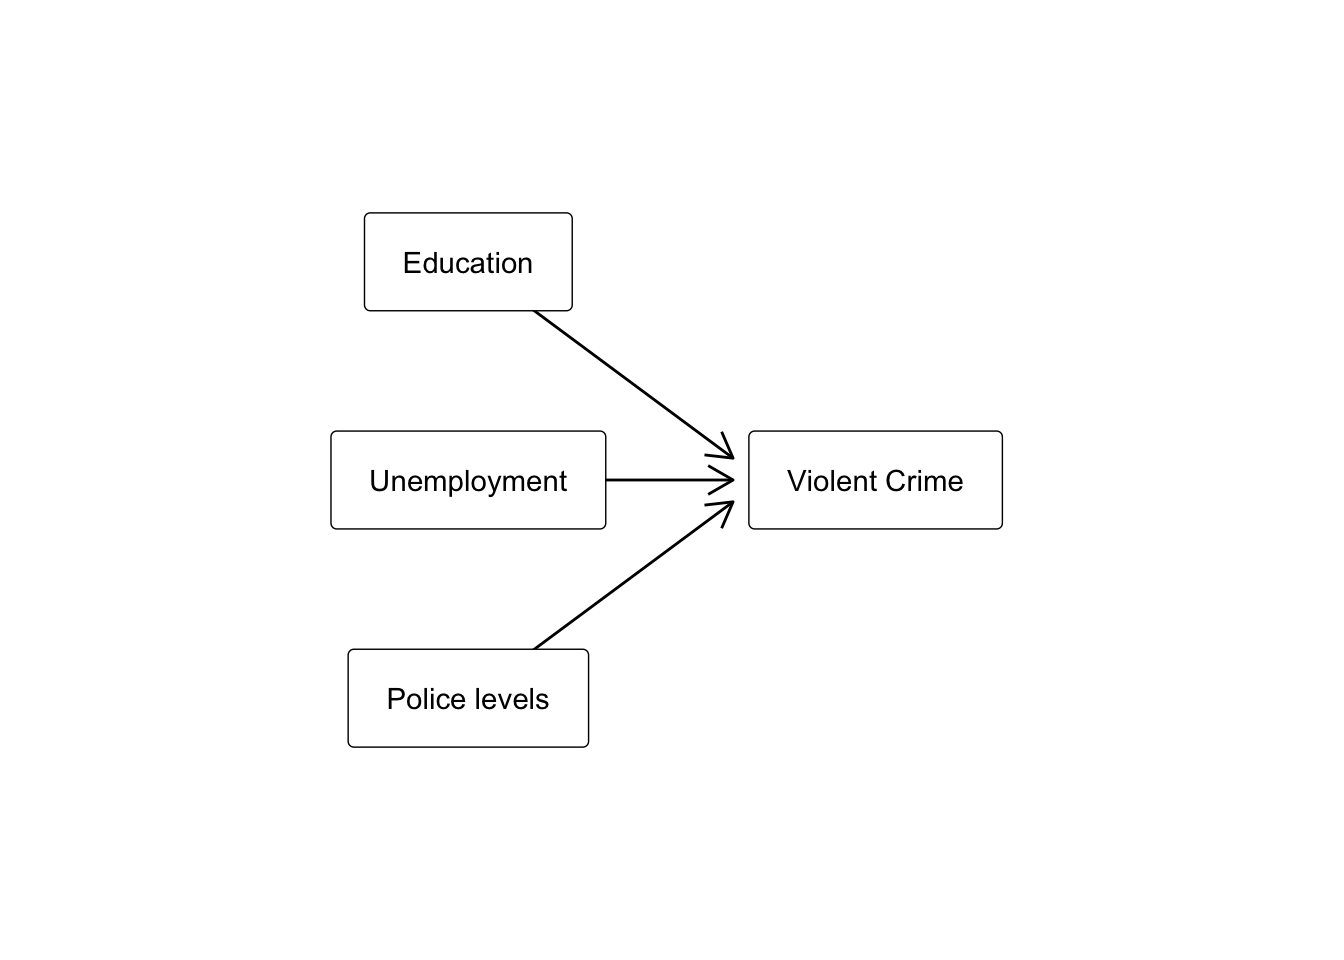 Three vertically tiled rounded boxes, with labels 'Education', 'Unemployment, and 'Police levels', each with an arrow pointing to a fourth box, labeled 'Violent Crime'.